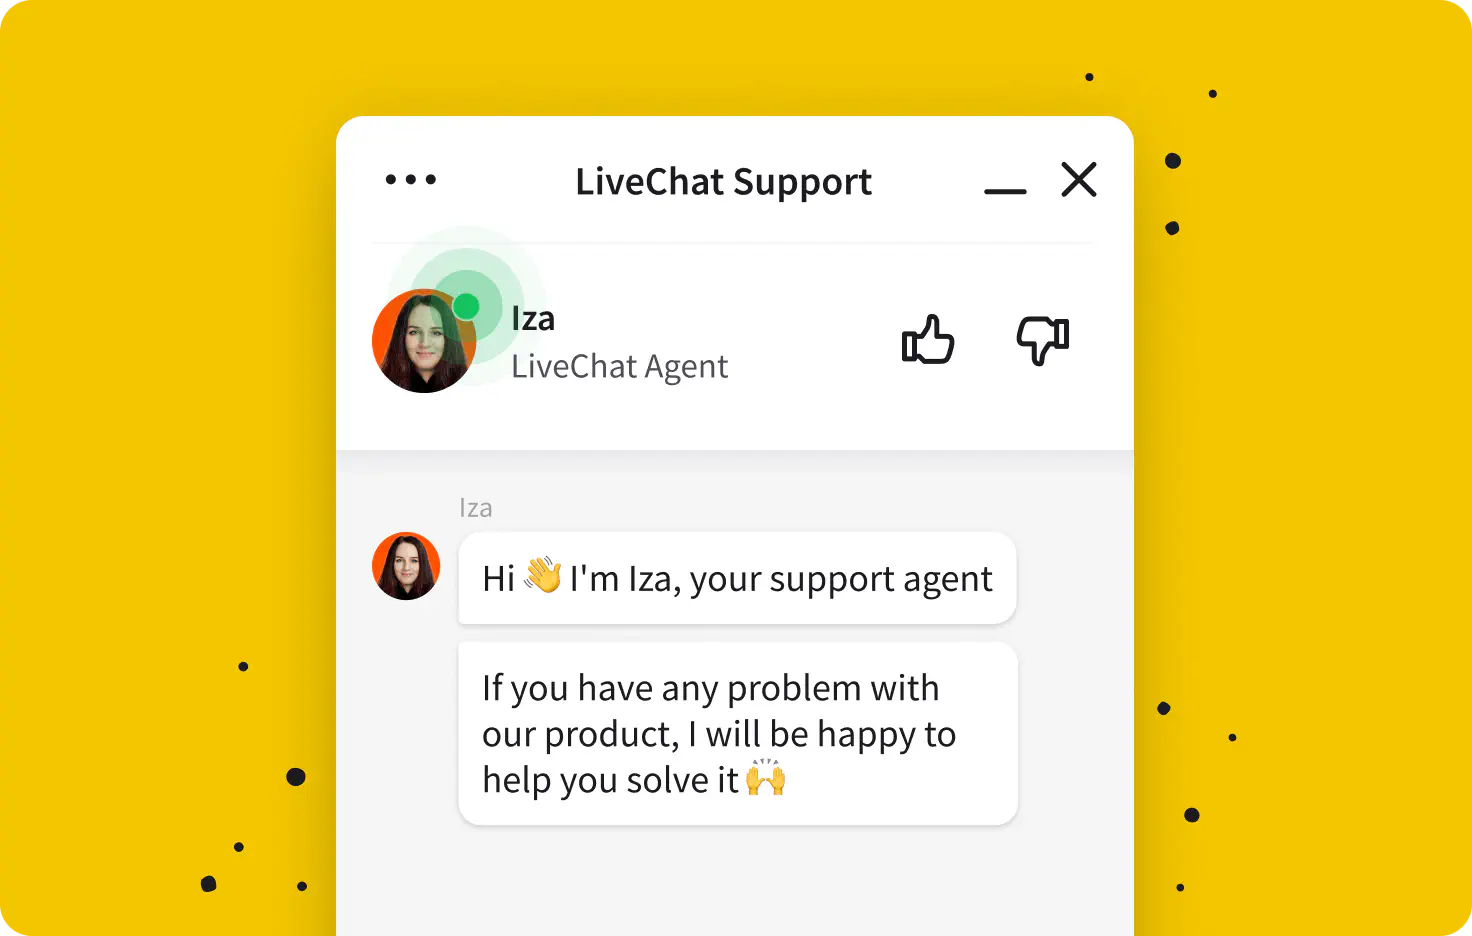 Screenshot of LiveChat on the mobile device with Customer Support rep available 24/7